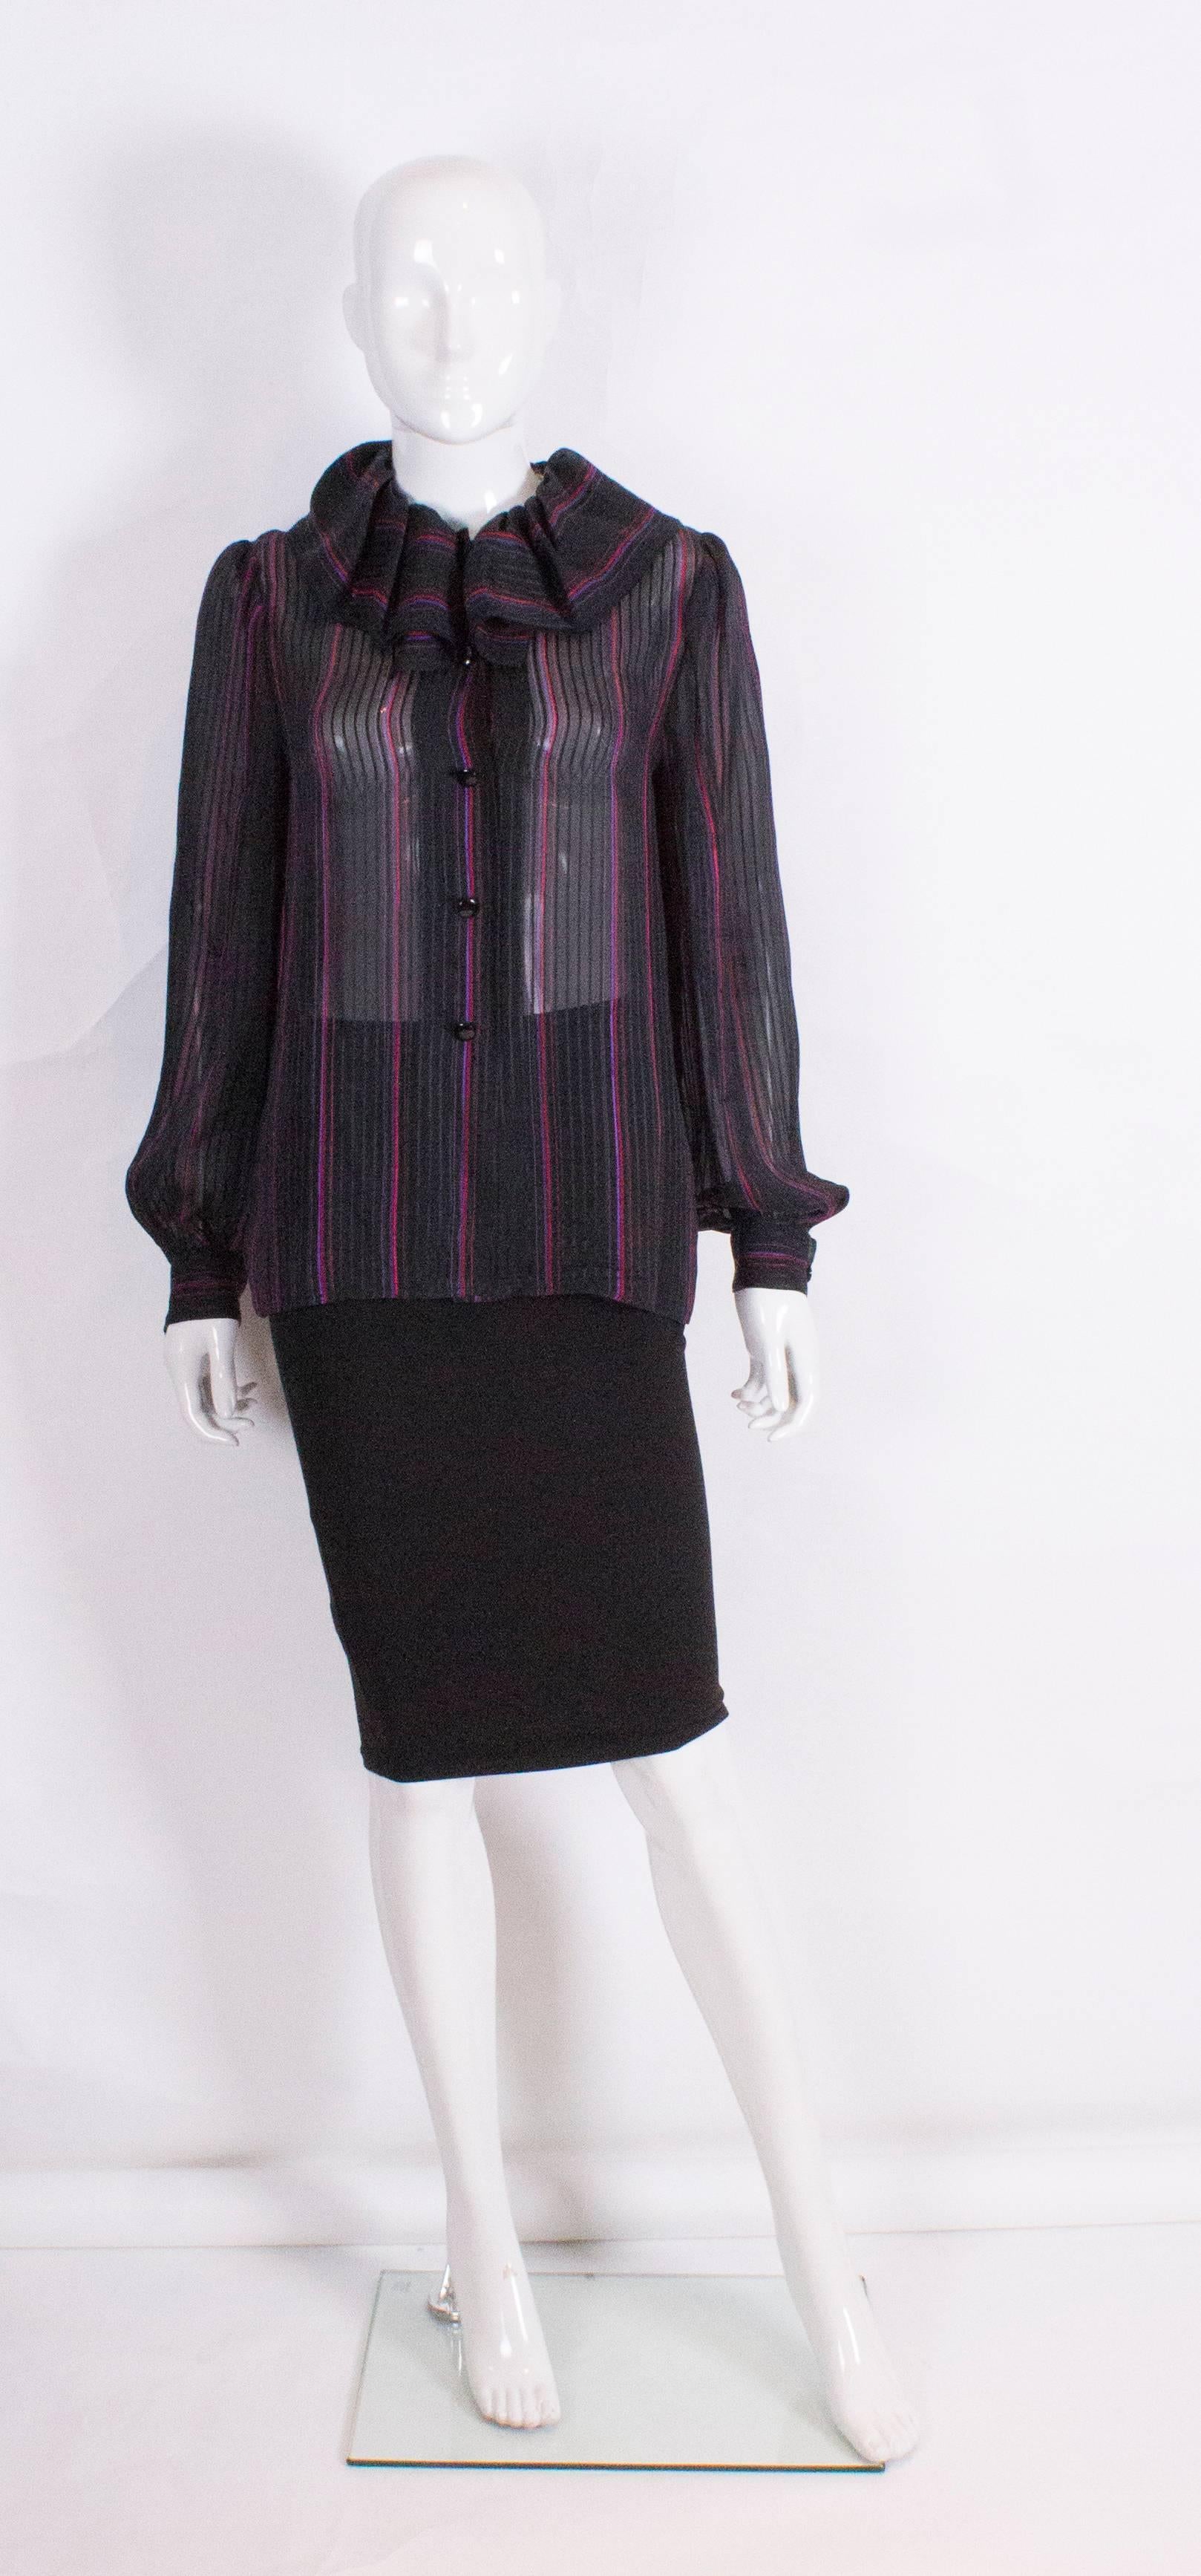 A chic blouse by Givenchy Boutique. The blouse  has a black background with pink and purple stripes, a frill collar, a central 5 button opening and one button on each cuff.